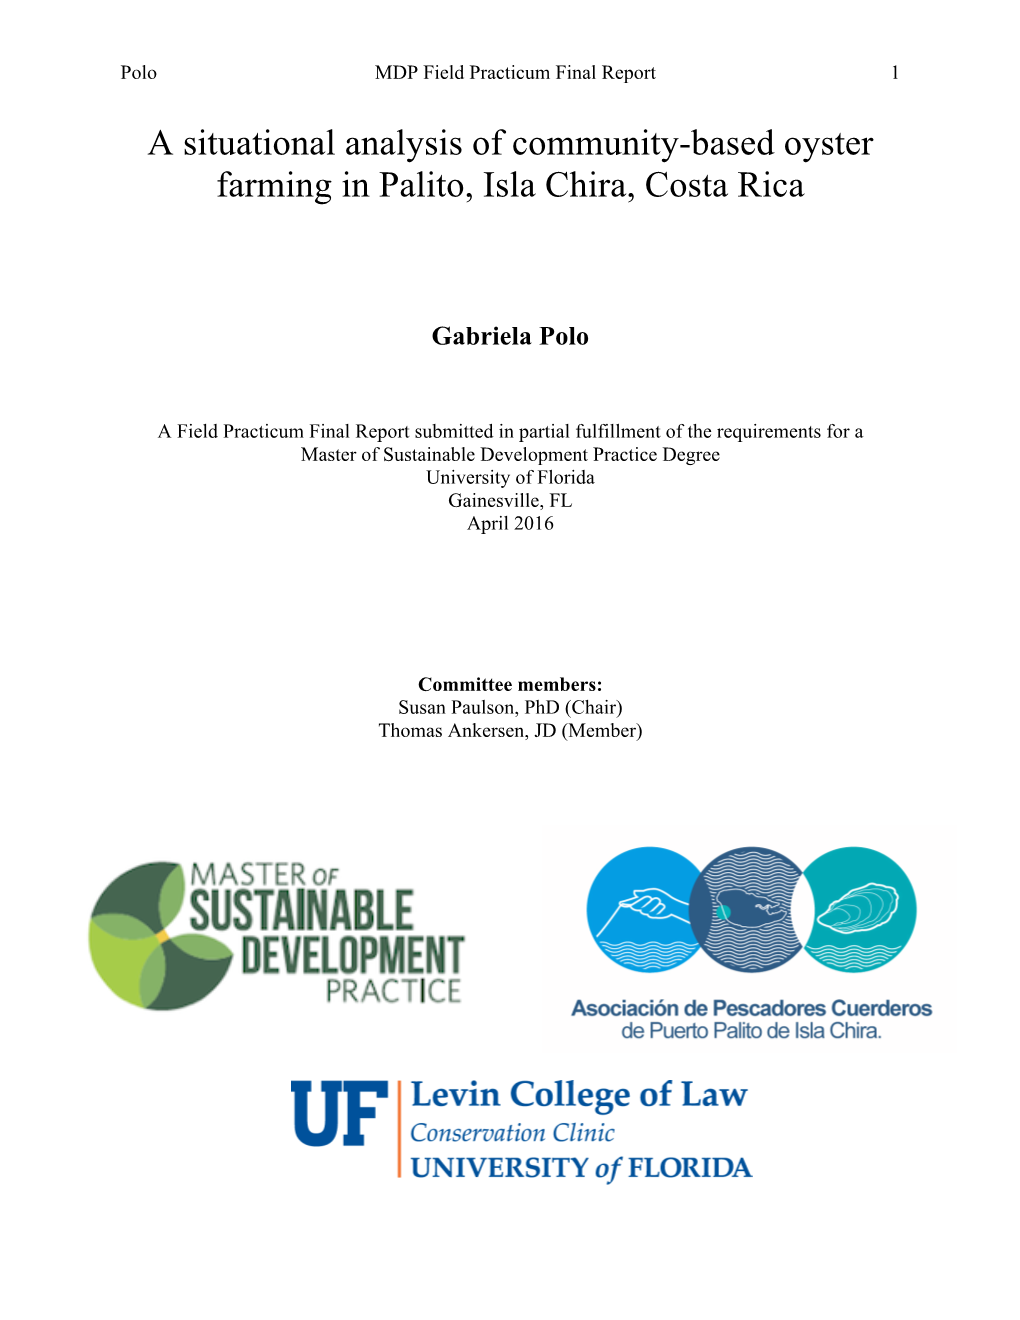 A Situational Analysis of Community-Based Oyster Farming in Palito, Isla Chira, Costa Rica